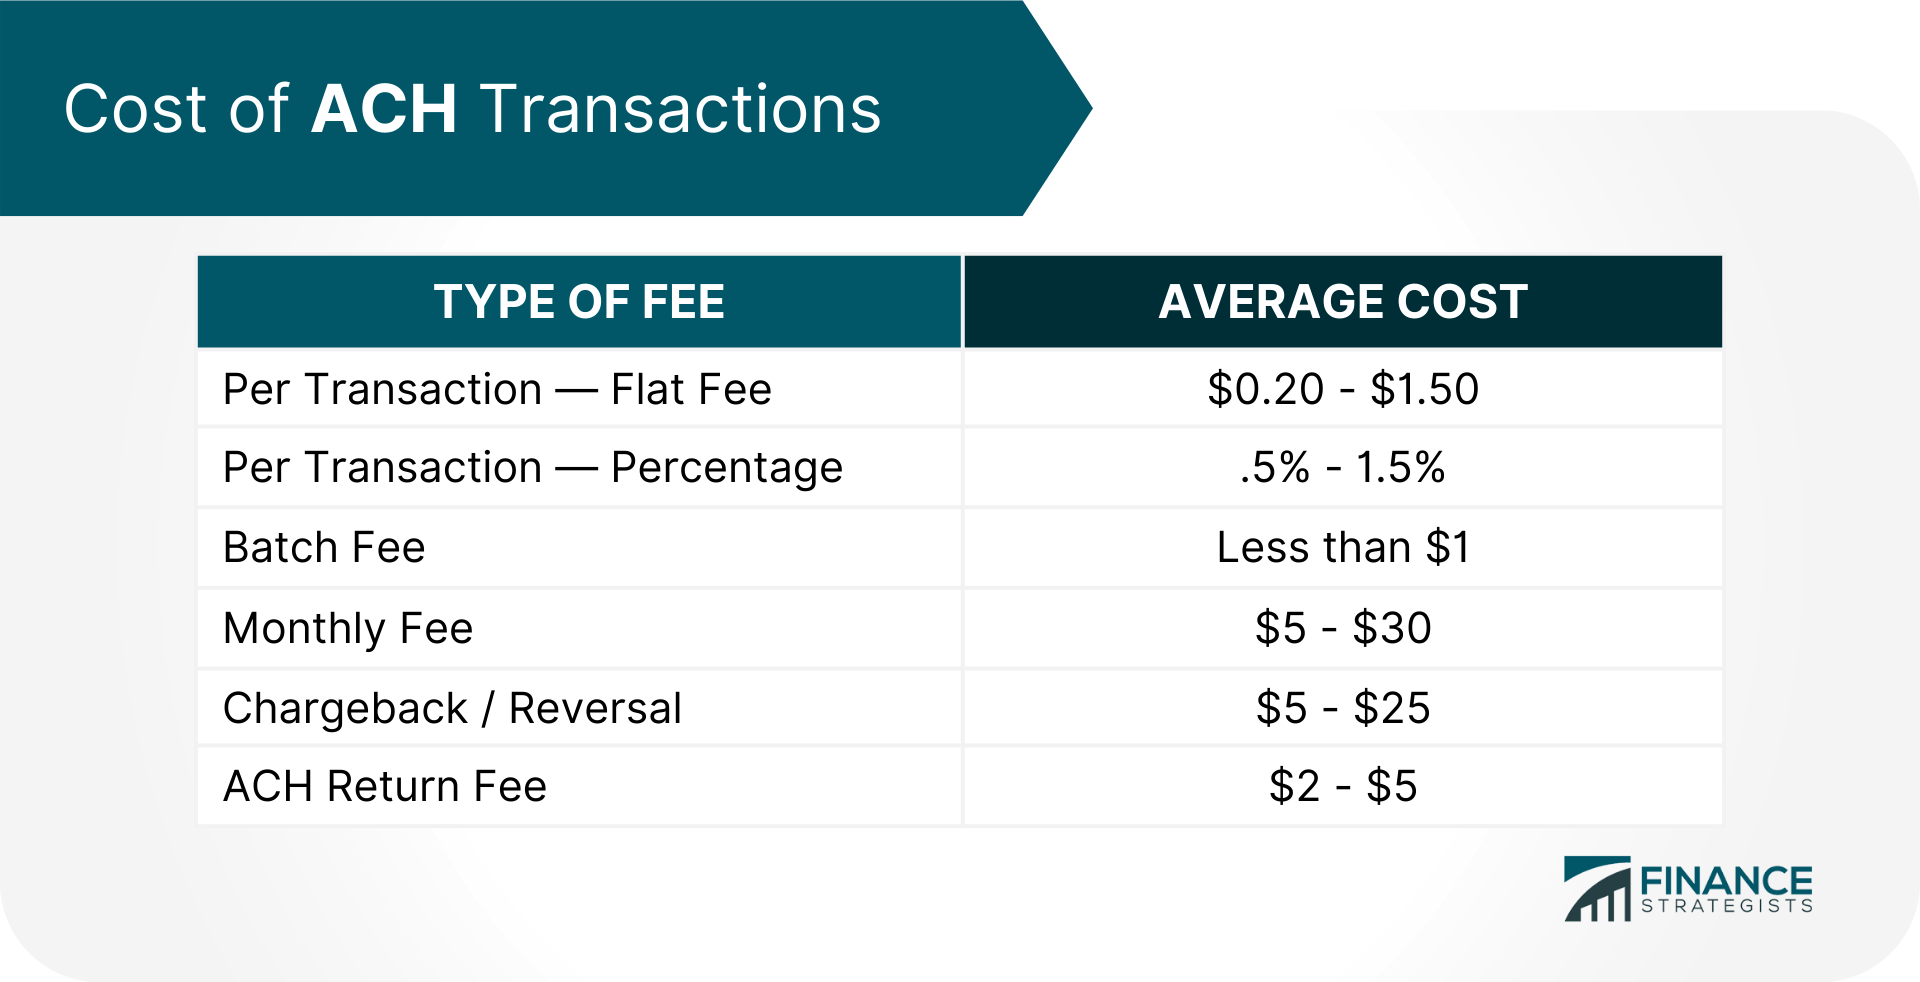 Cost of ACH Transactions